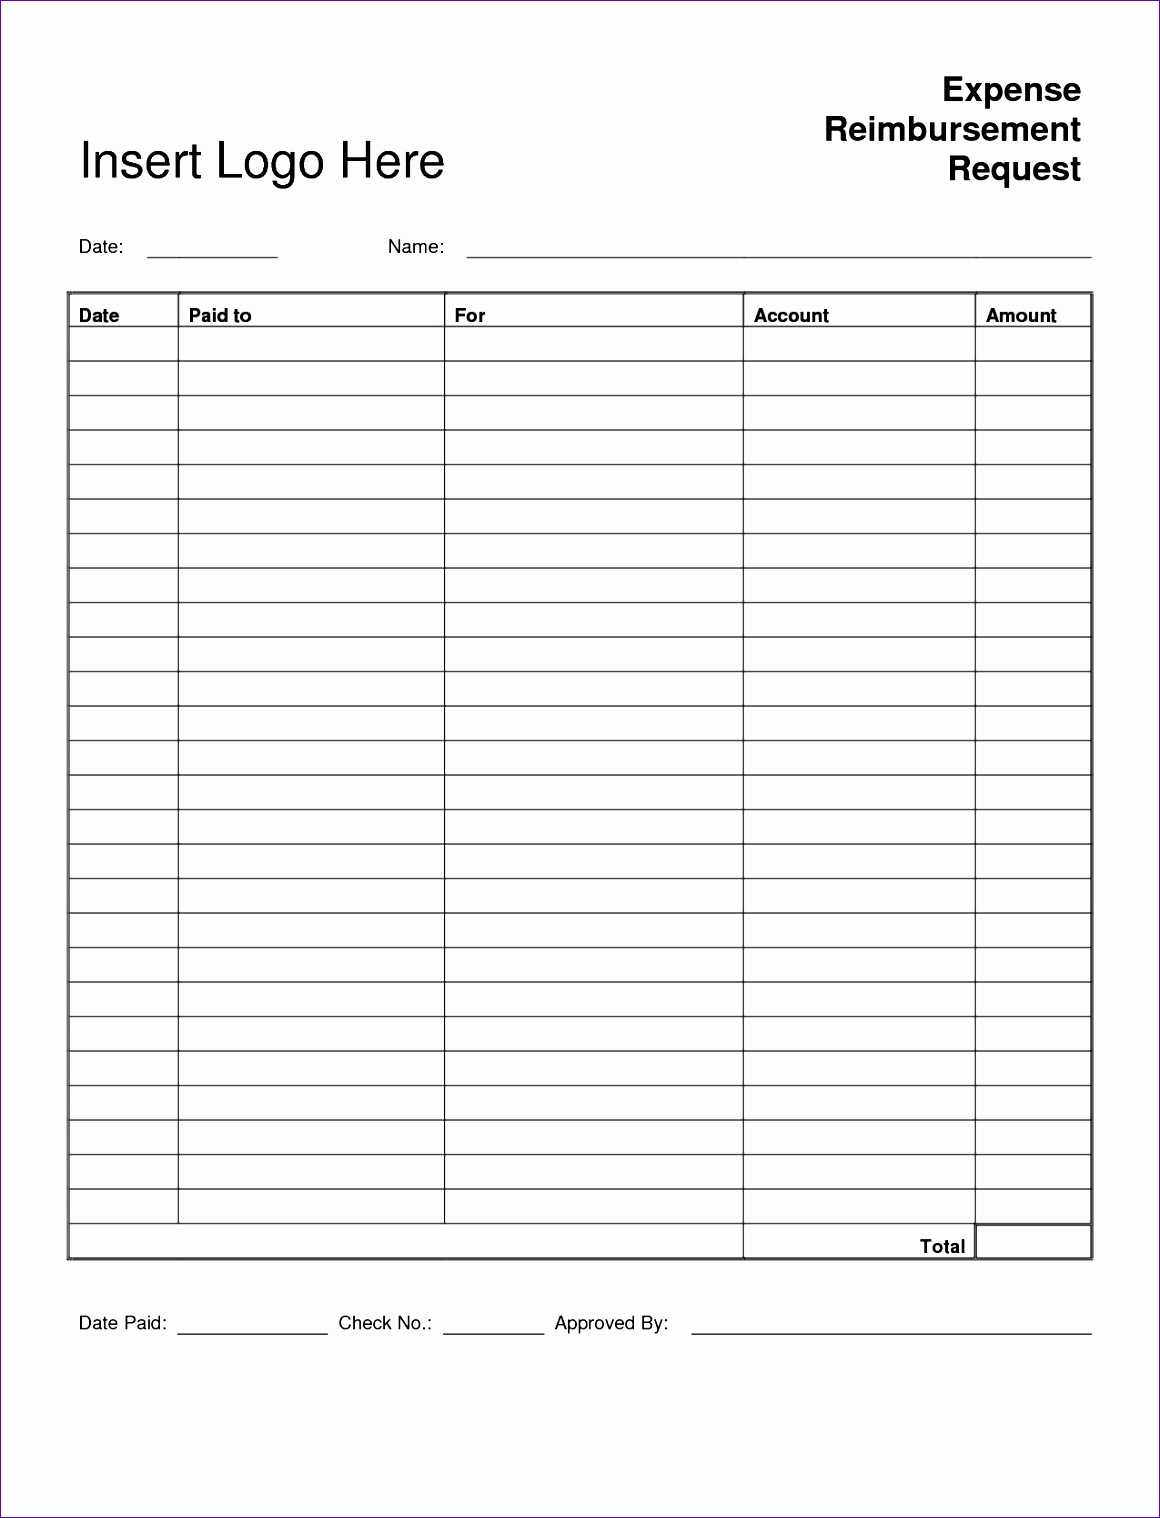 Travel Expense Form Template Excel F8Bud Luxury Best S Of Simple For Simple Expense Form